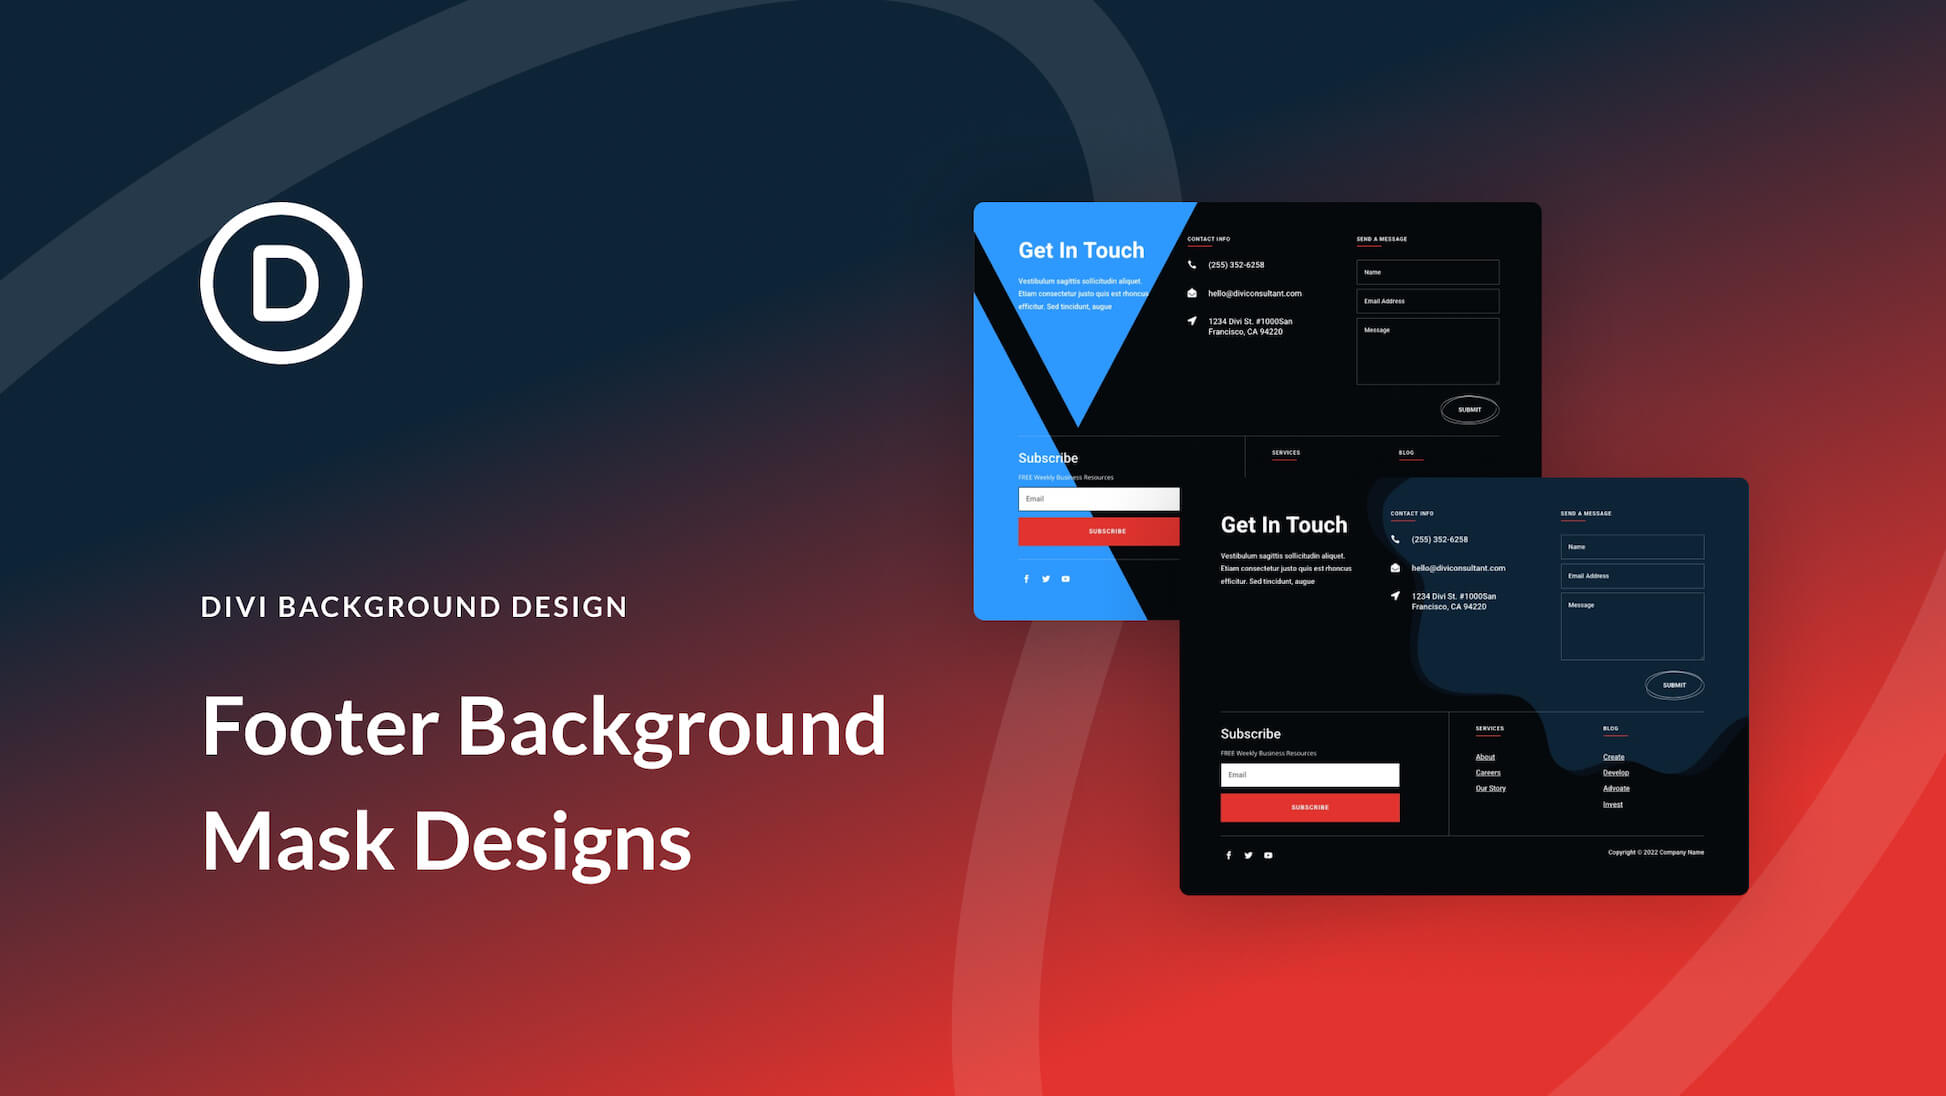 How To Add Background Masks to Your Divi Footer